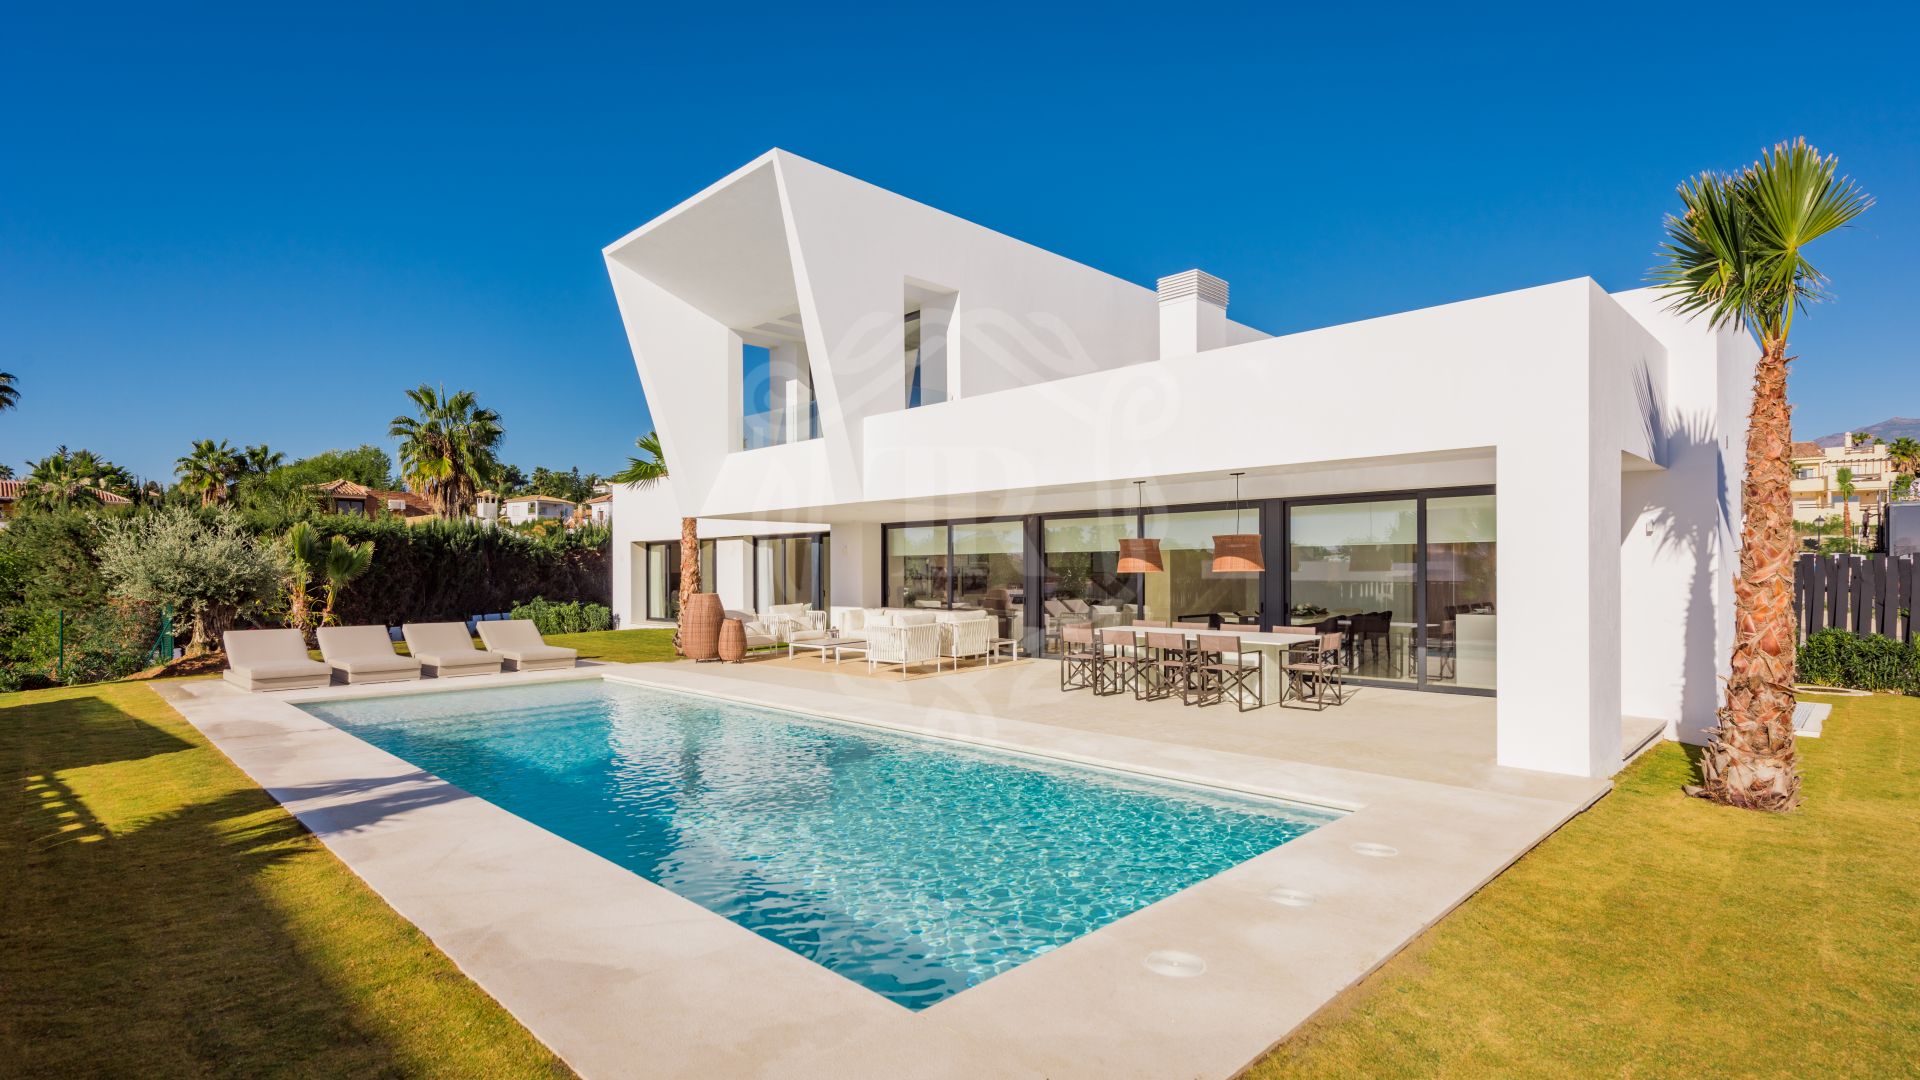 Brand new villa in El Paraiso within walking distance to the beach, New Golden Mile, Estepona